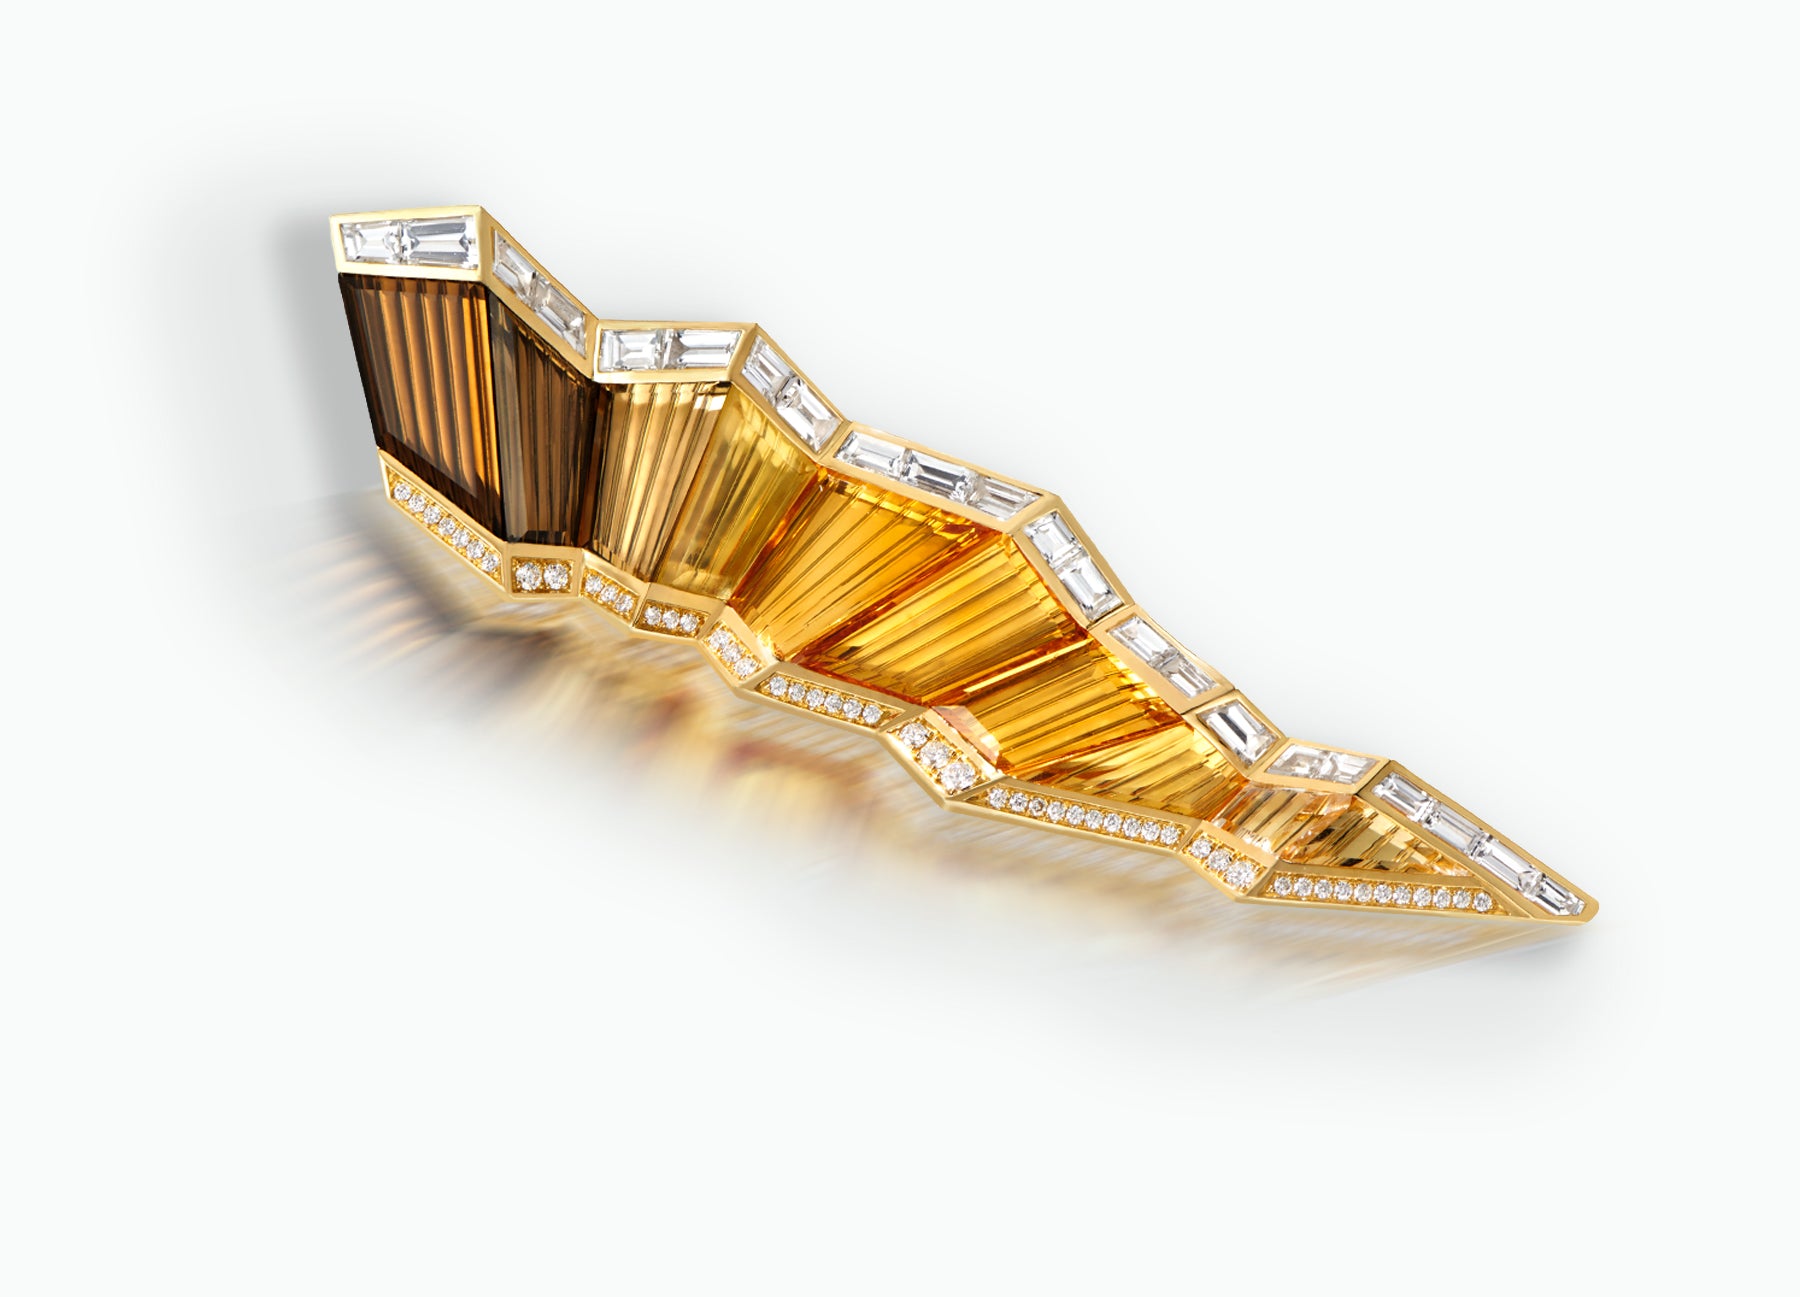 Kaleidoscope Pleat Brooch crafted in 18k yellow Gold and set with smoky Quartz, Citrine, yellow Topaz, clear Crystal, white Sapphires and white Diamonds.